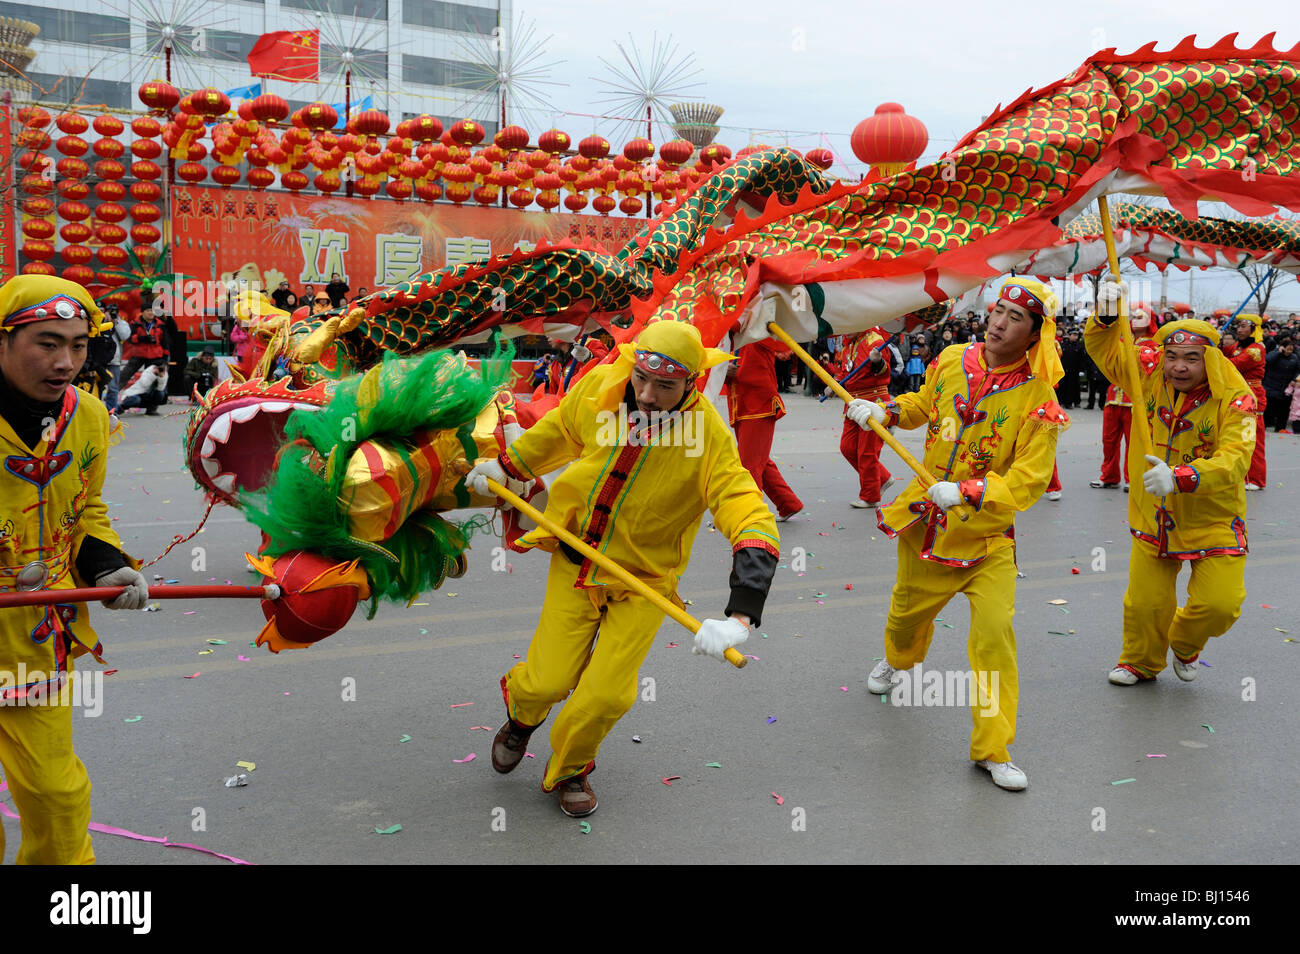 People perform traditonal dragon dancing during Yuanxiao Festival or the Lantern Festival in Yuxian, Hebei, China. 28-Feb-201010 Stock Photo